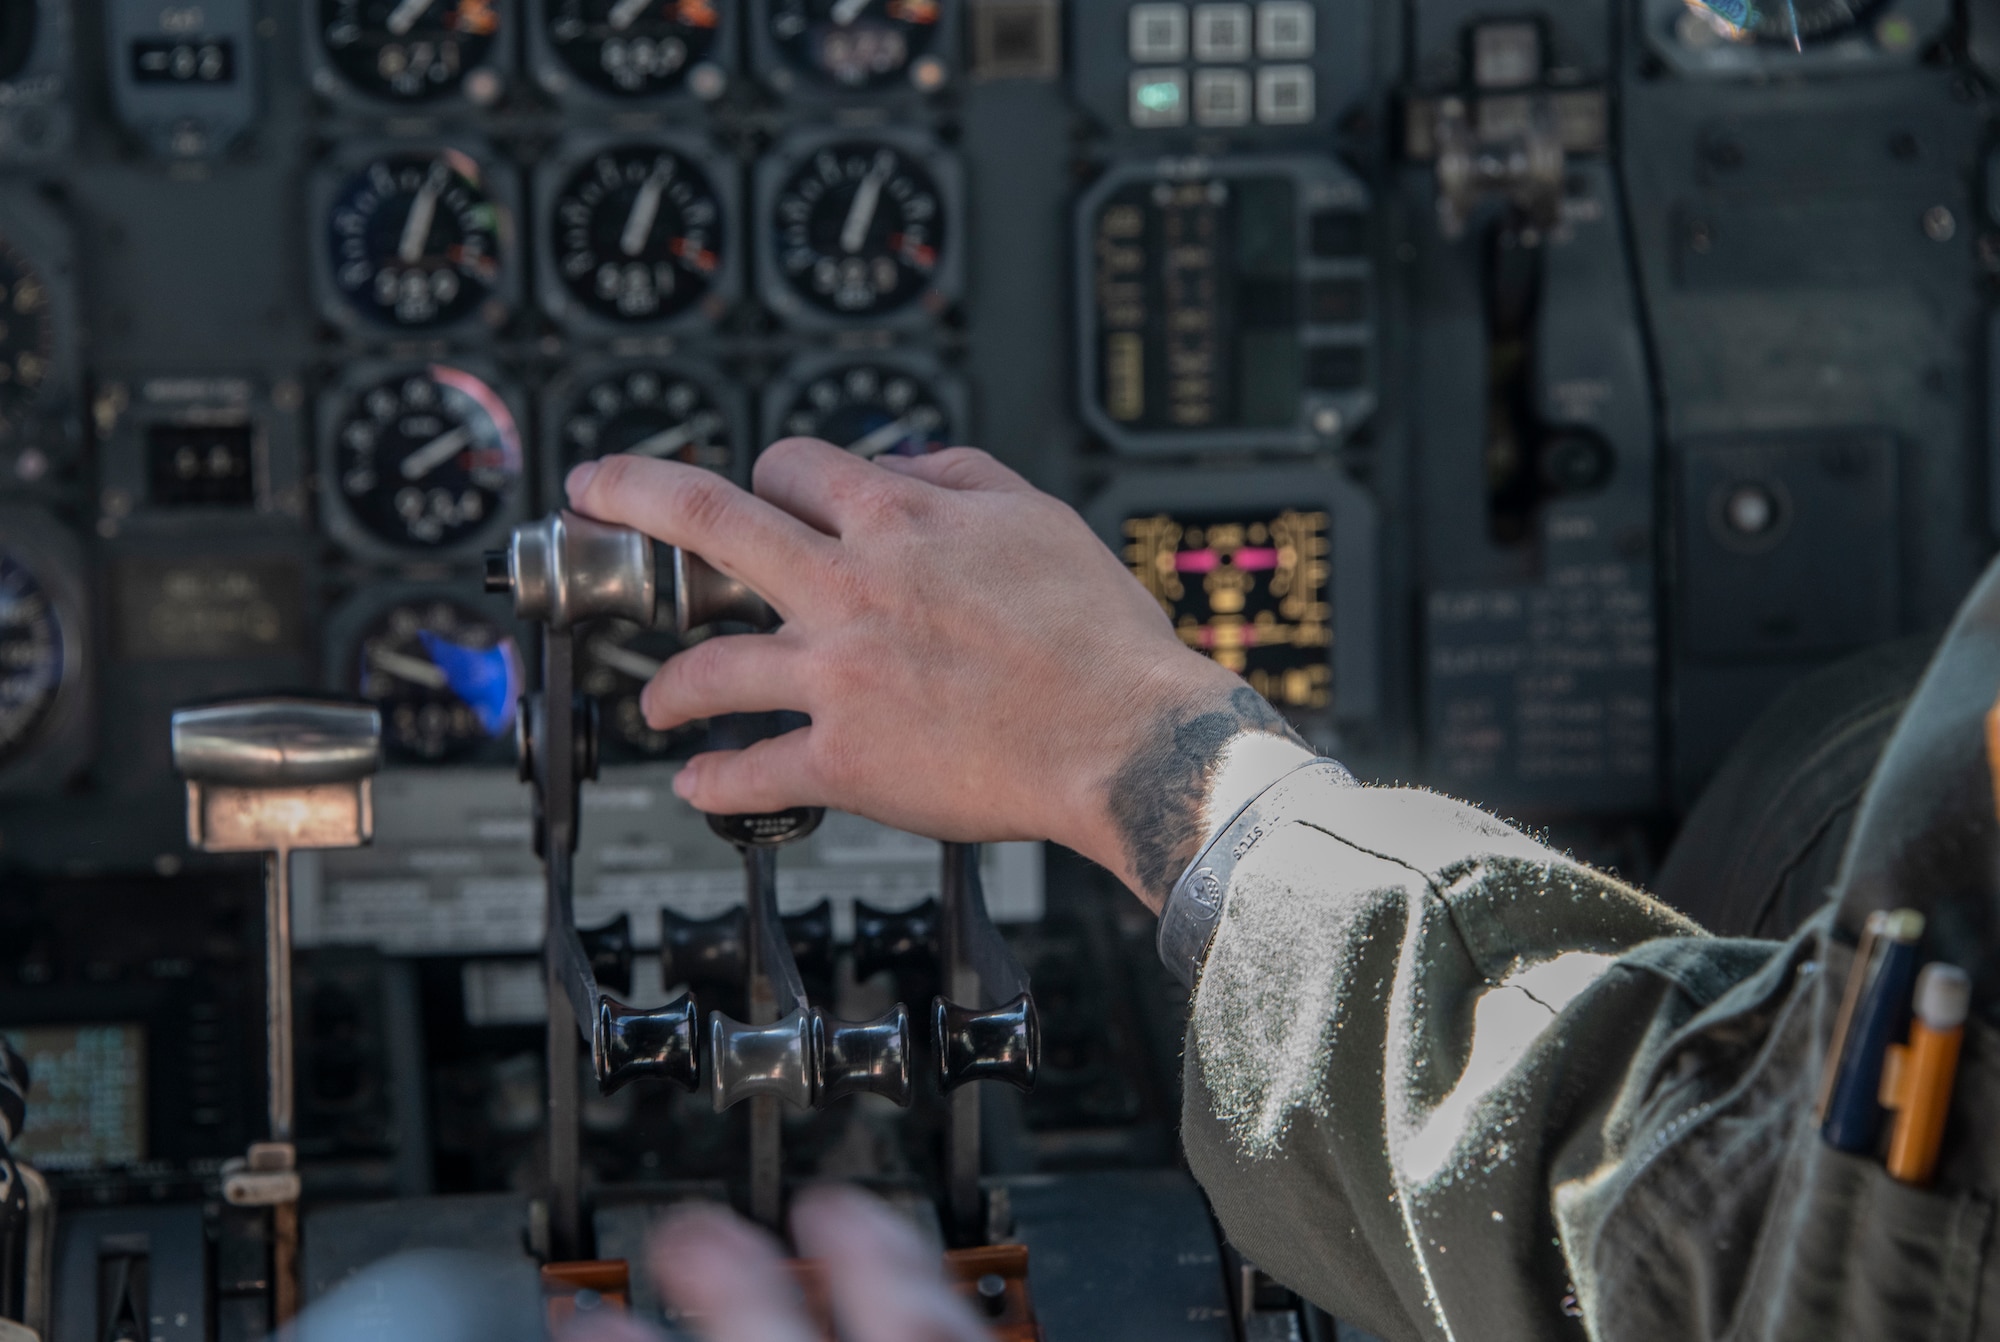 U.S. Air Force 1st Lt. Macy Miller, 6th Air Refueling Squadron KC-10 Extender pilot, adjusts the controls during Women’s History Month heritage flight at Travis Air Force Base, California, March 22, 2022. In honor of Women's History Month, an all-female KC-10 flight crew from the 60th and 349th Air Mobility Wings flew on an aerial refueling training mission over California and Oregon. (U.S. Air Force photo by Heide Couch)